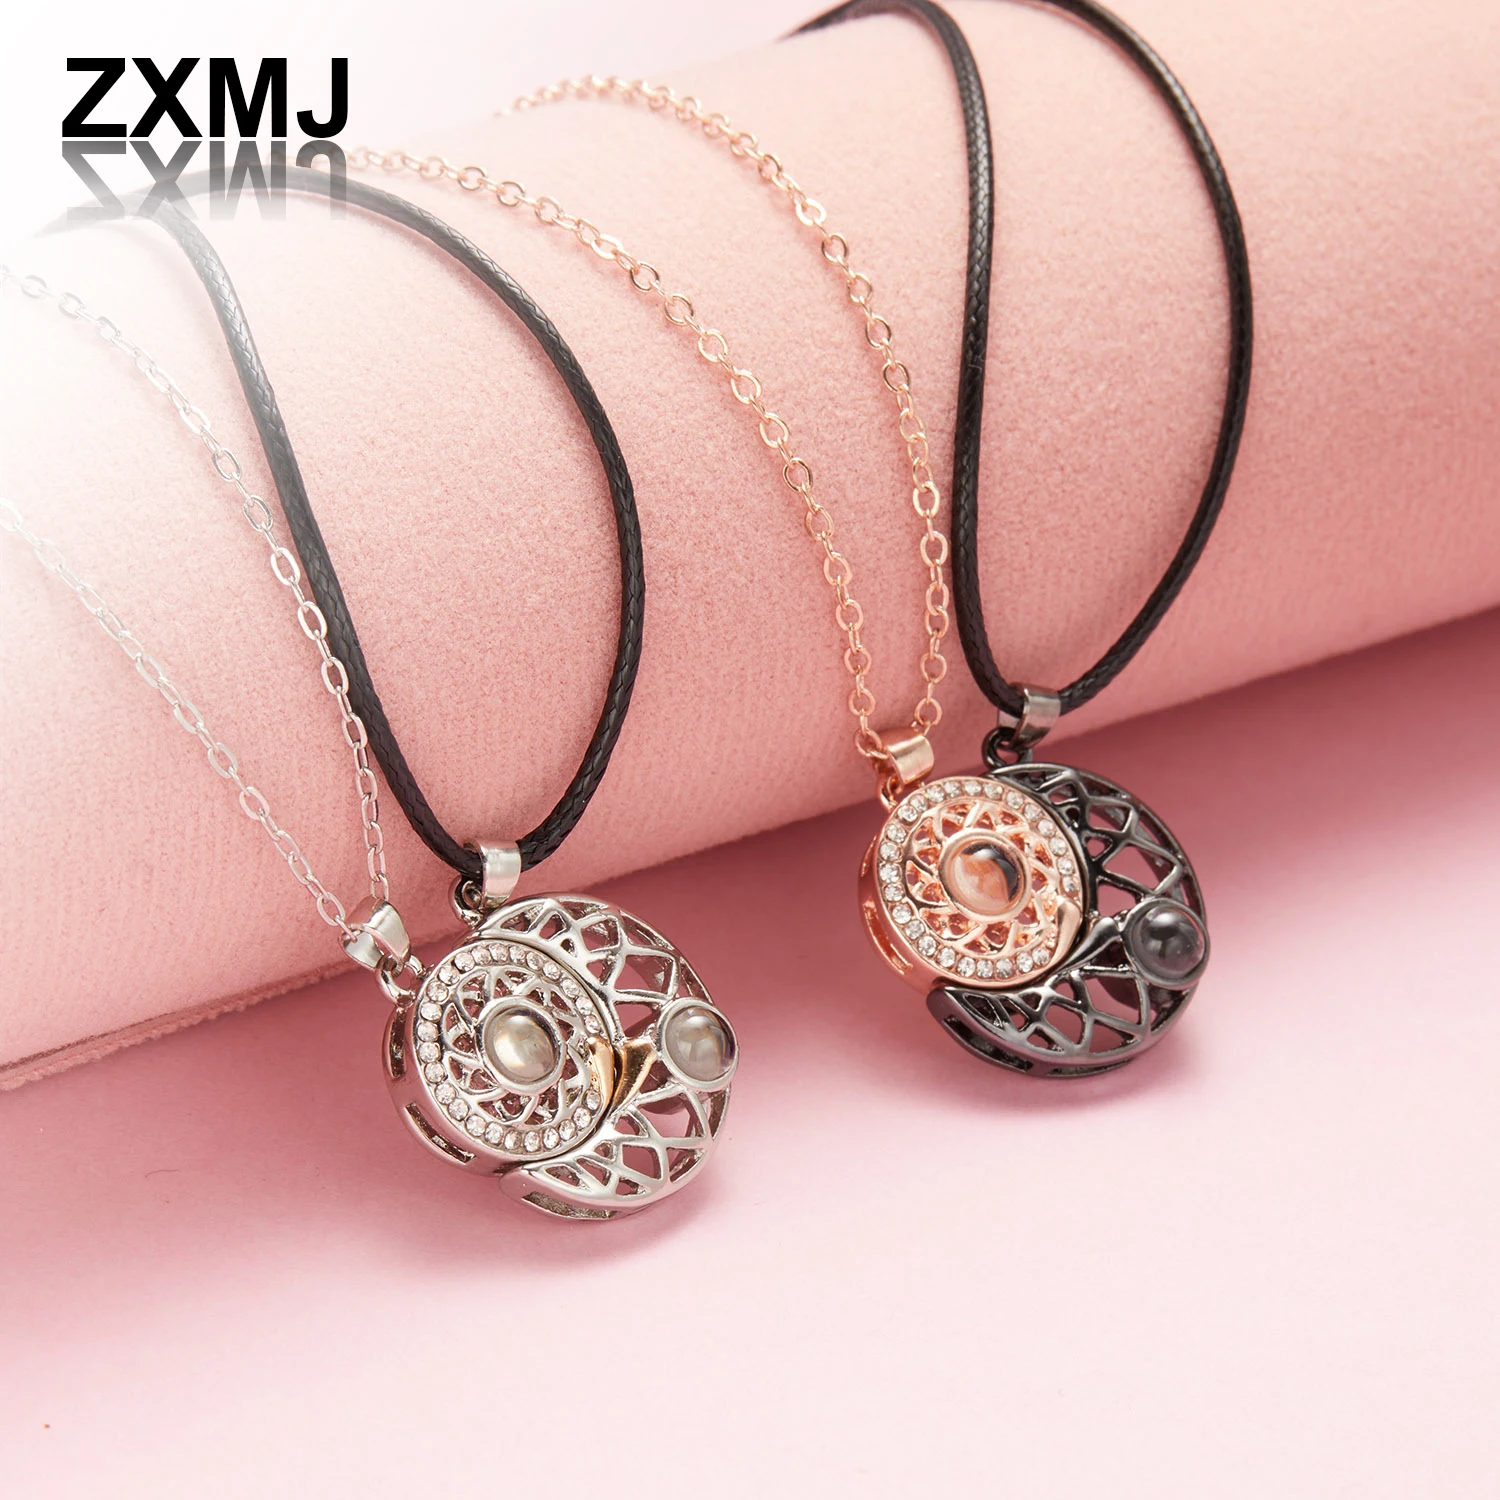 

ZXMJ Fashion Couple Necklace Sun and Moon Magnetic Attraction Necklaces Projection 100 Languages of "I Love You" Necklaces Set